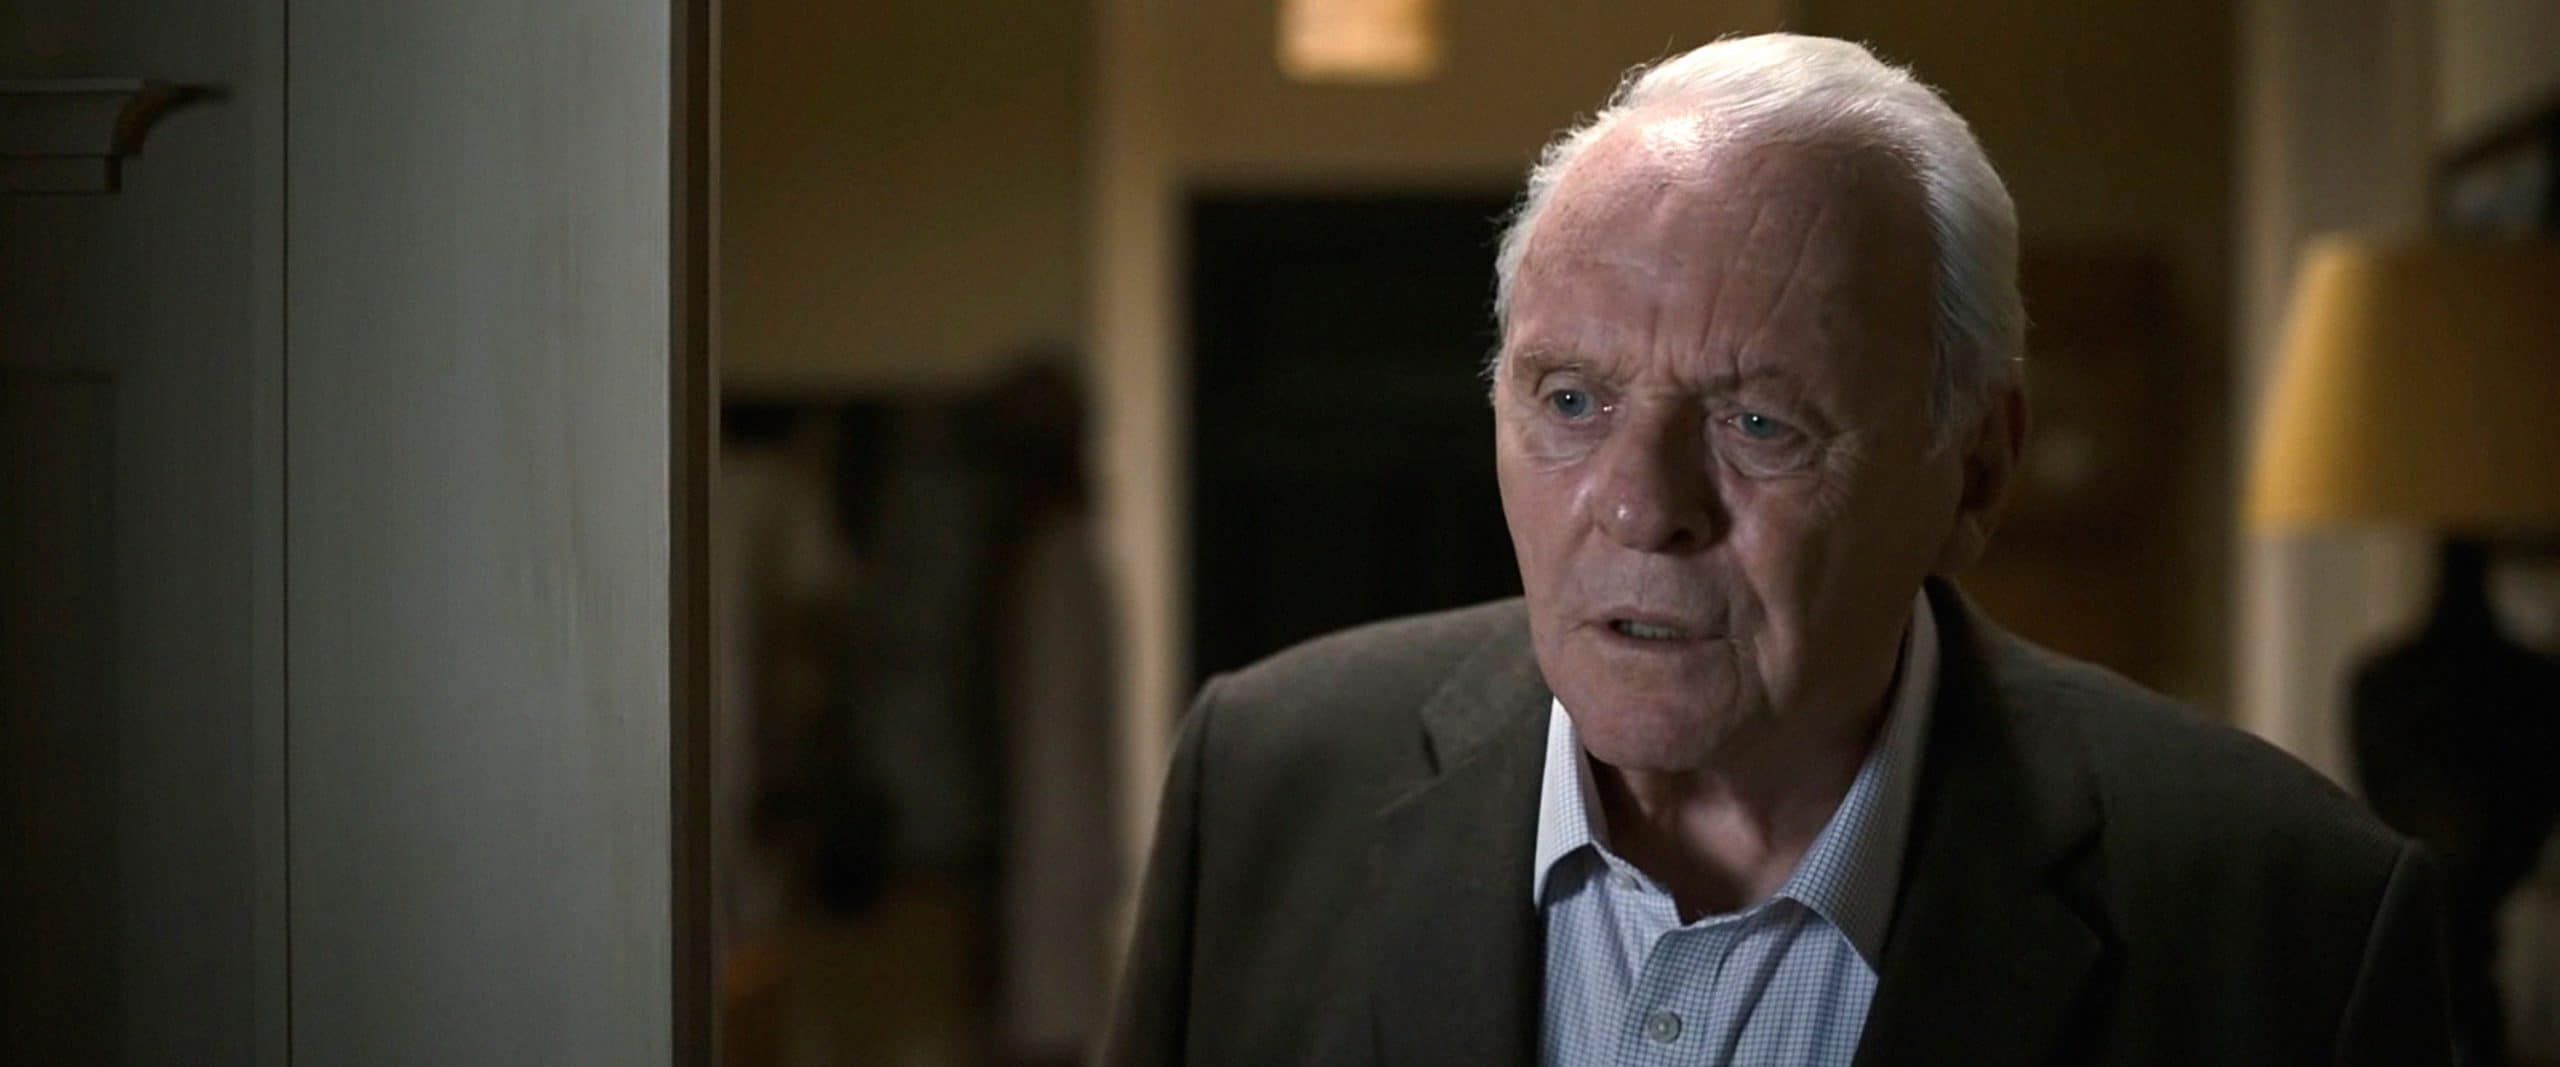 83-Year-Old Anthony Hopkins Becomes Oldest Actor Ever To Win ‘Best Actor’ Oscar